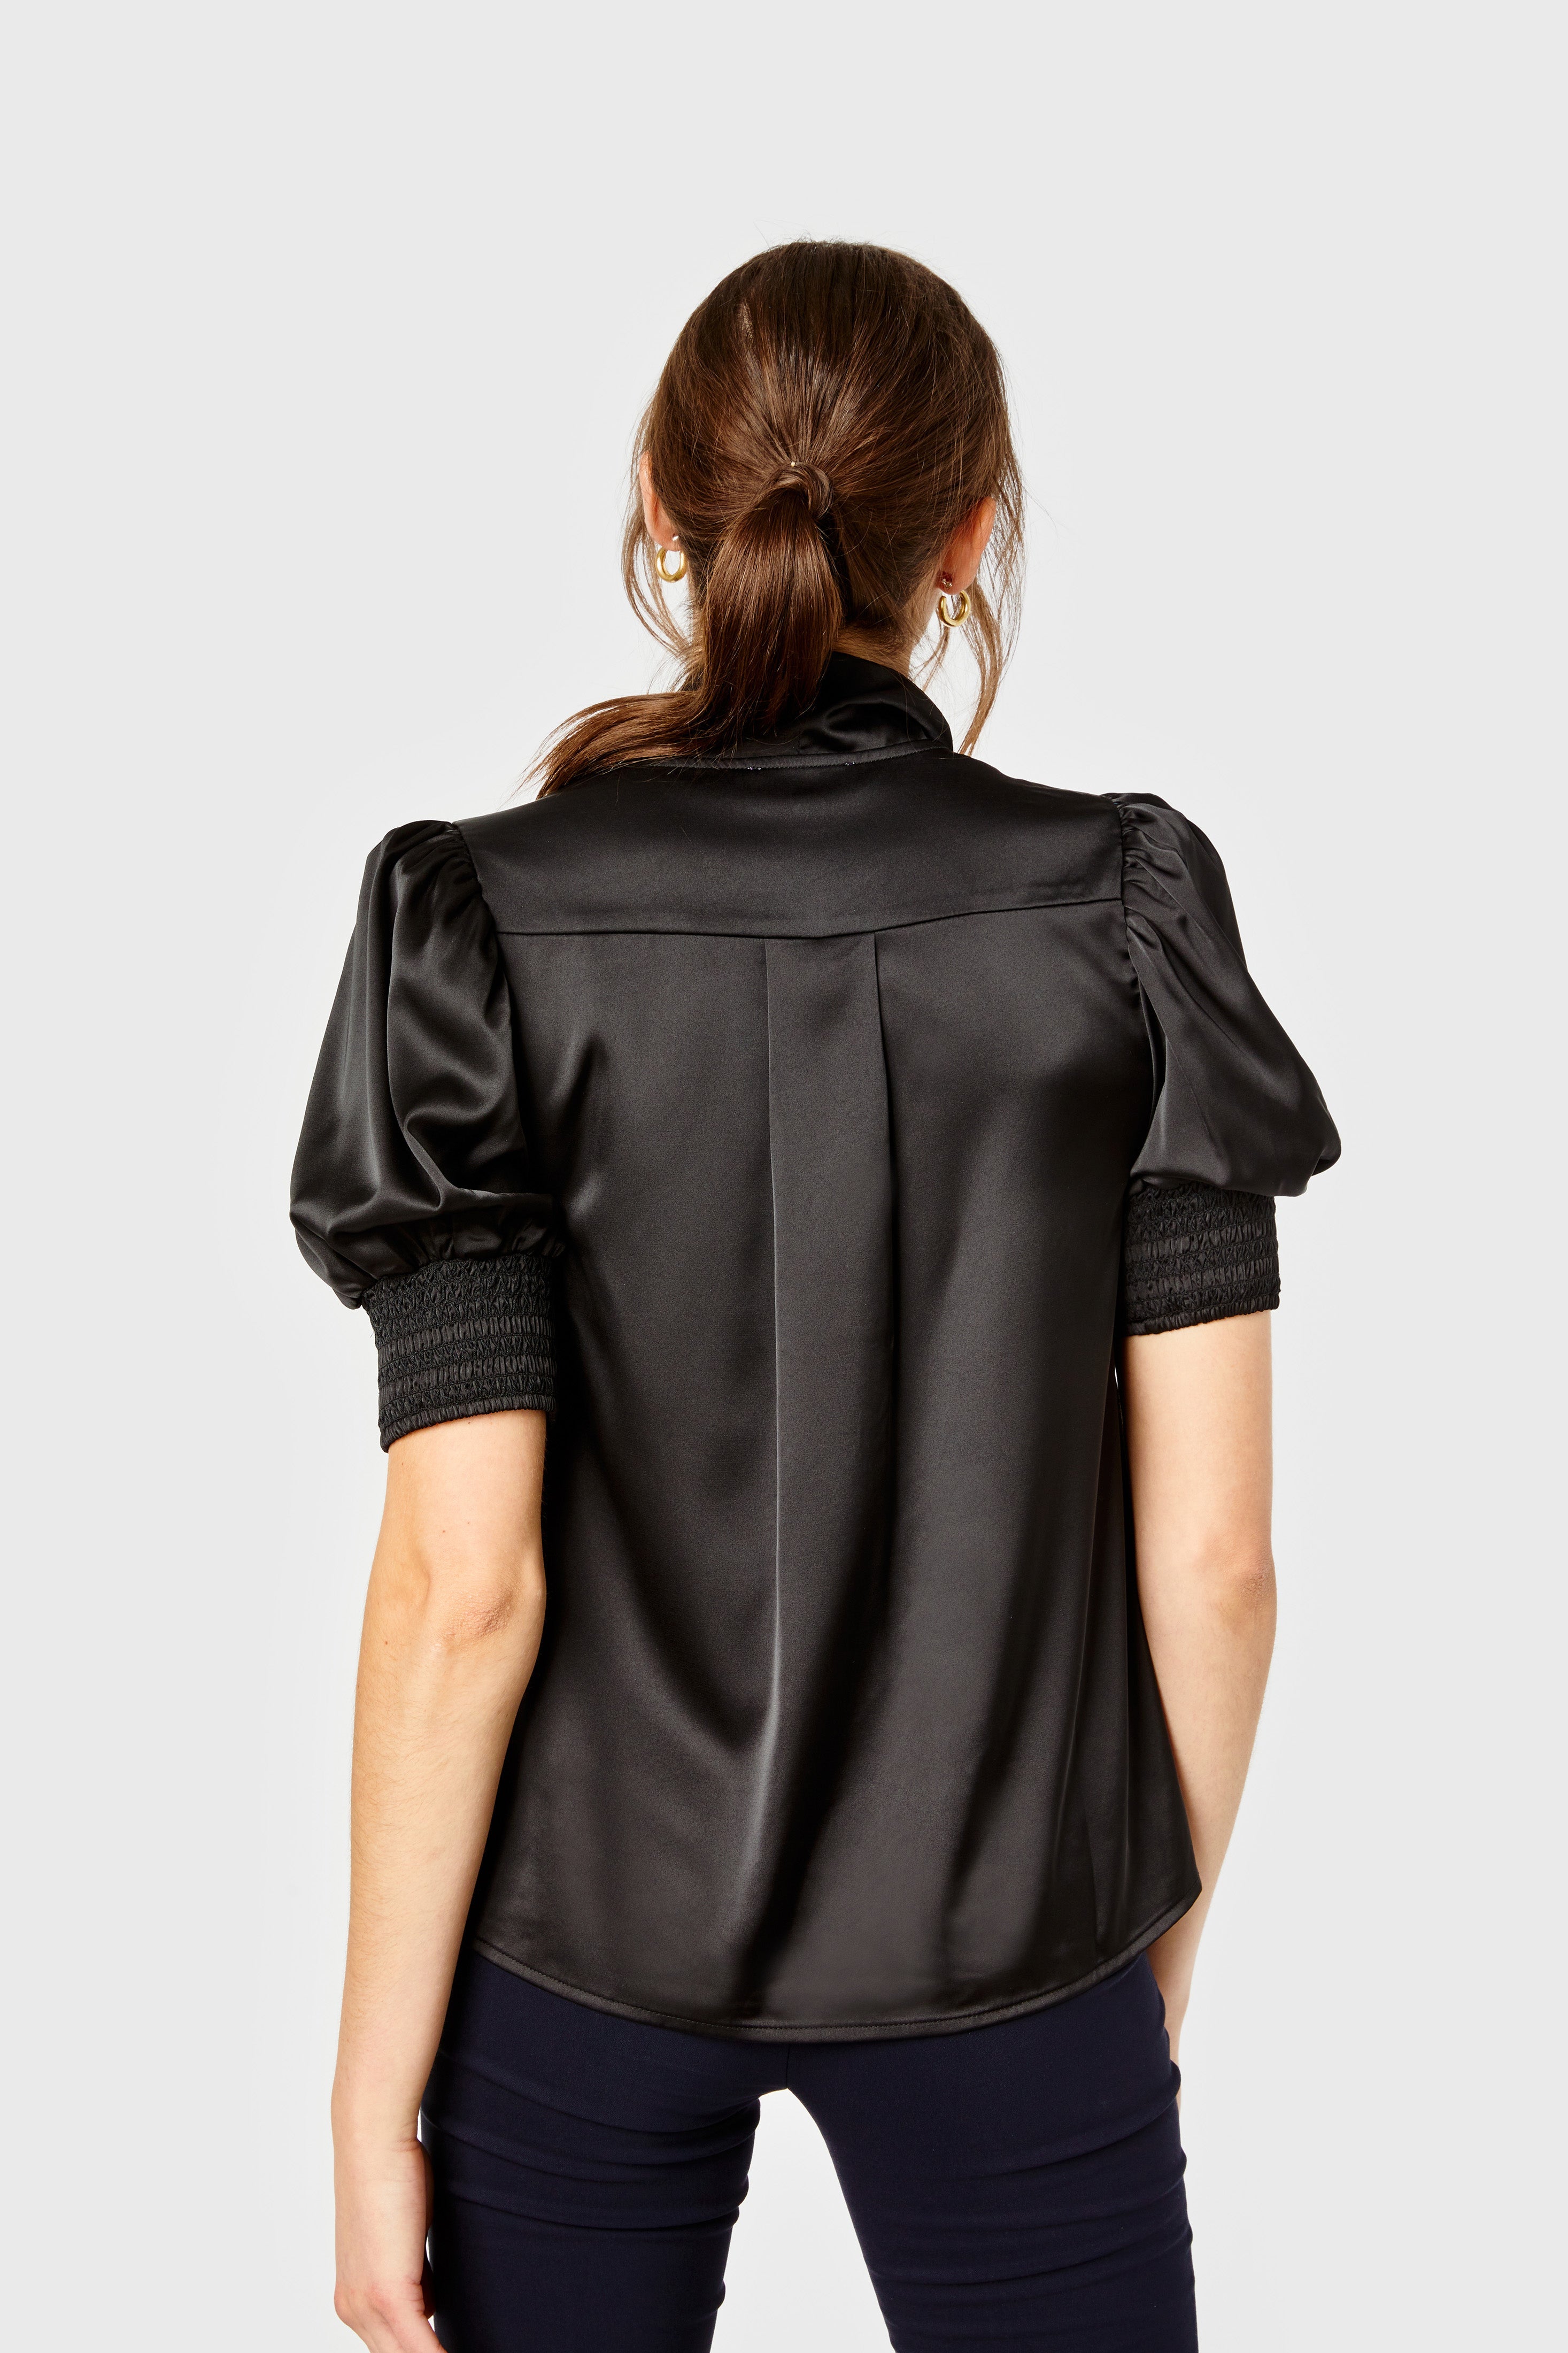 Peggy Top-Poly Span-Black by Cartolina